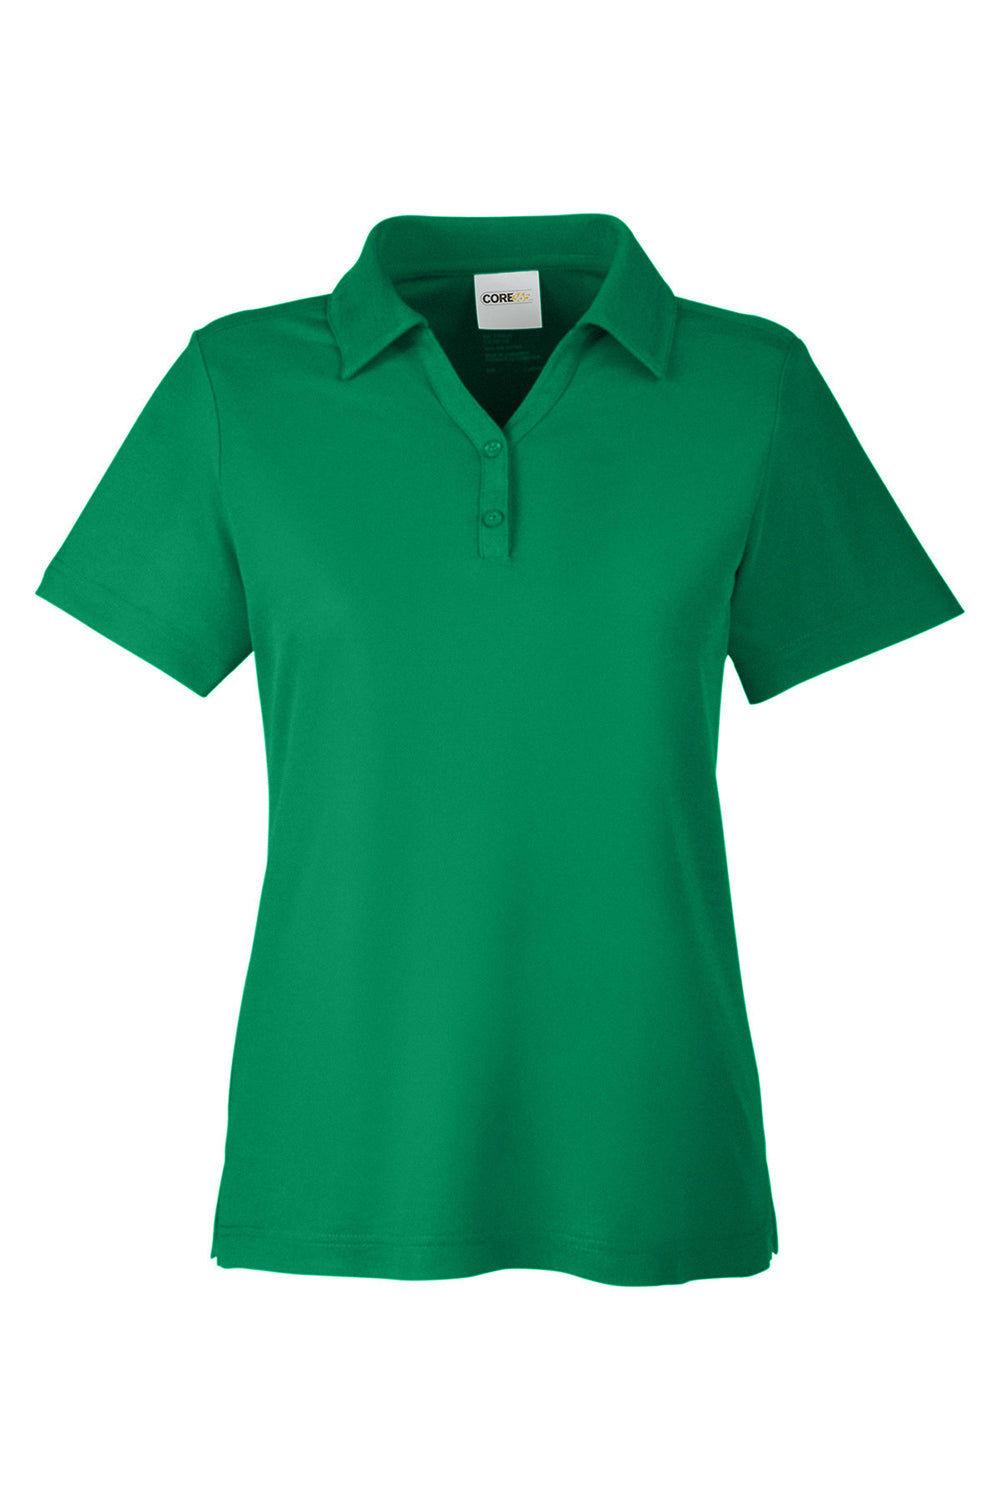 Core 365 CE112W Womens Fusion ChromaSoft Performance Moisture Wicking Pique Short Sleeve Polo Shirt Kelly Green Flat Front